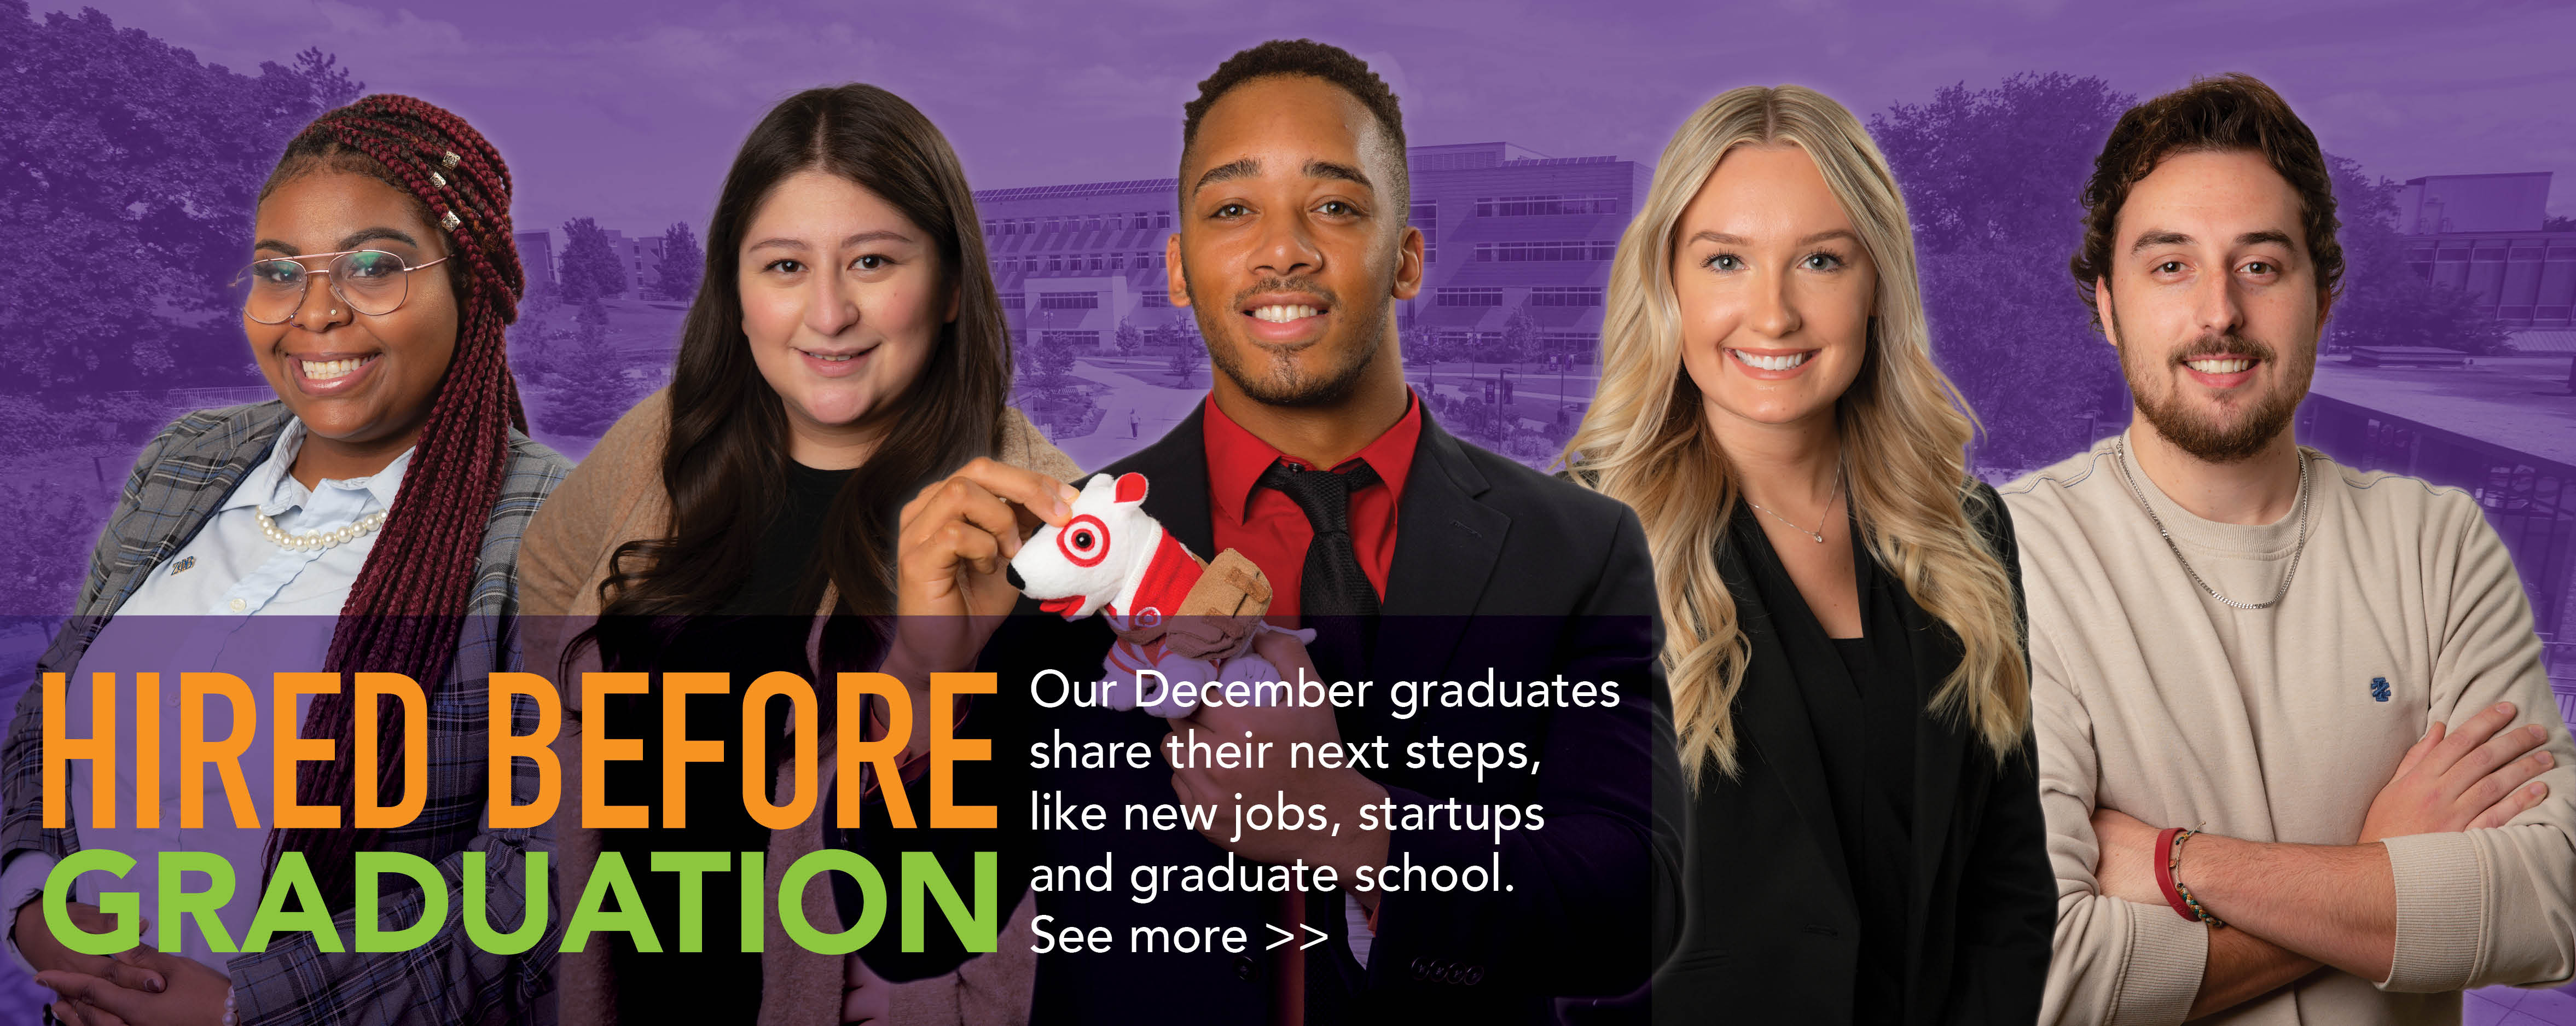 Students from Hired Before Graduation on a purple backgorund.